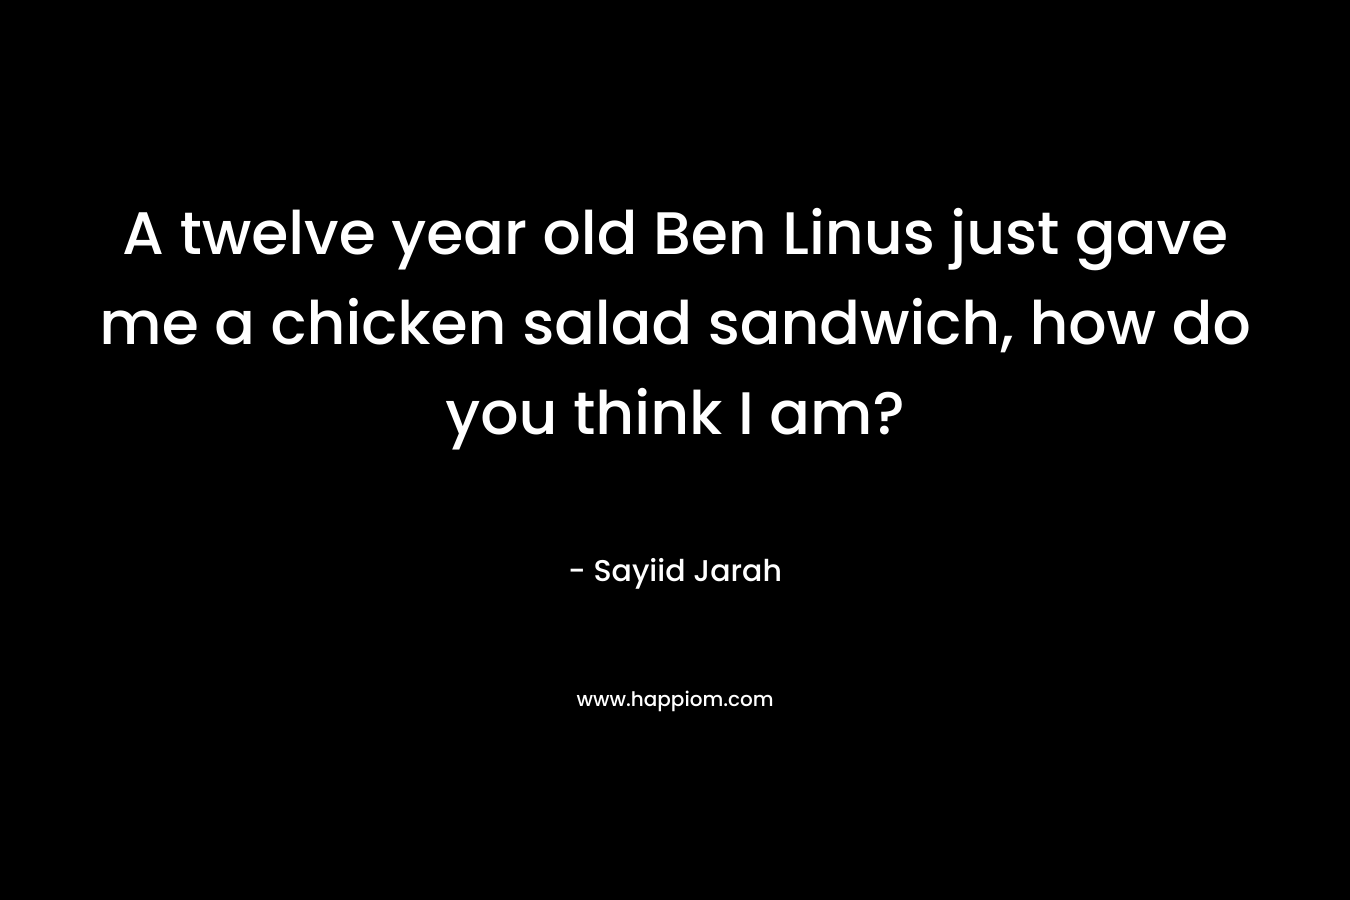 A twelve year old Ben Linus just gave me a chicken salad sandwich, how do you think I am? – Sayiid Jarah